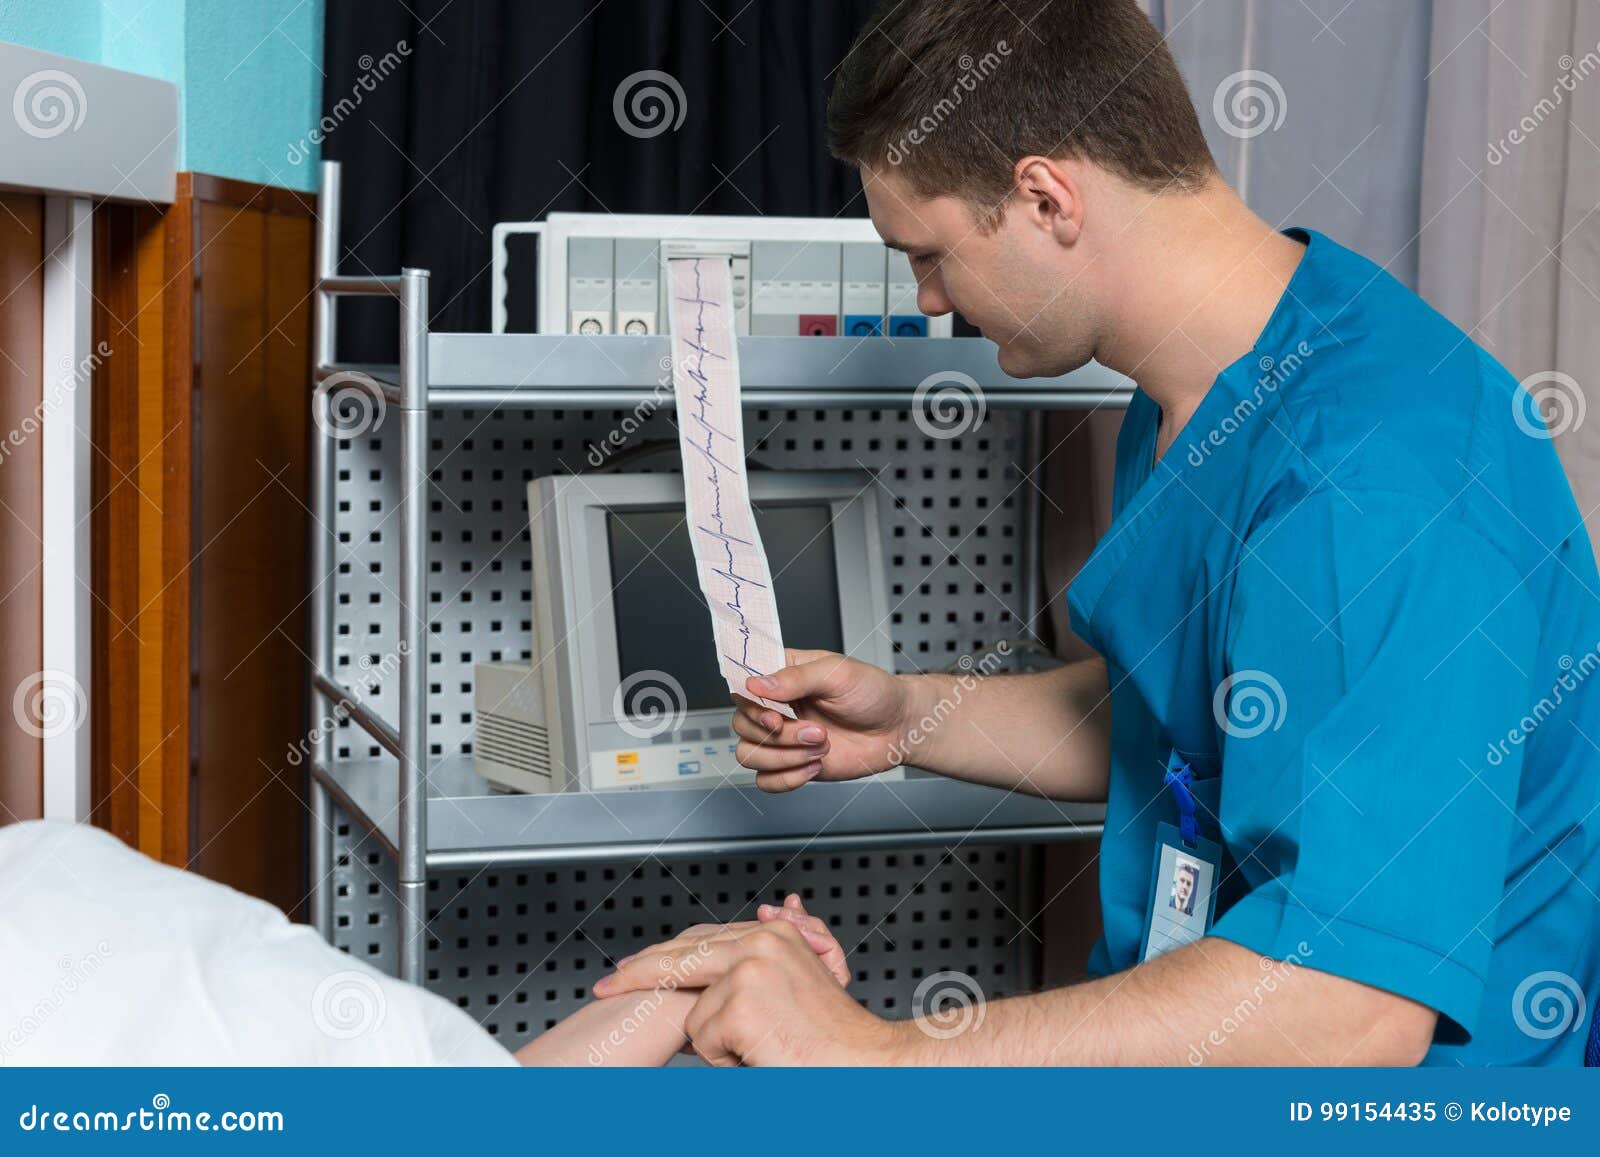 doctor in uniform is looking at analysis of electrocardiograph e